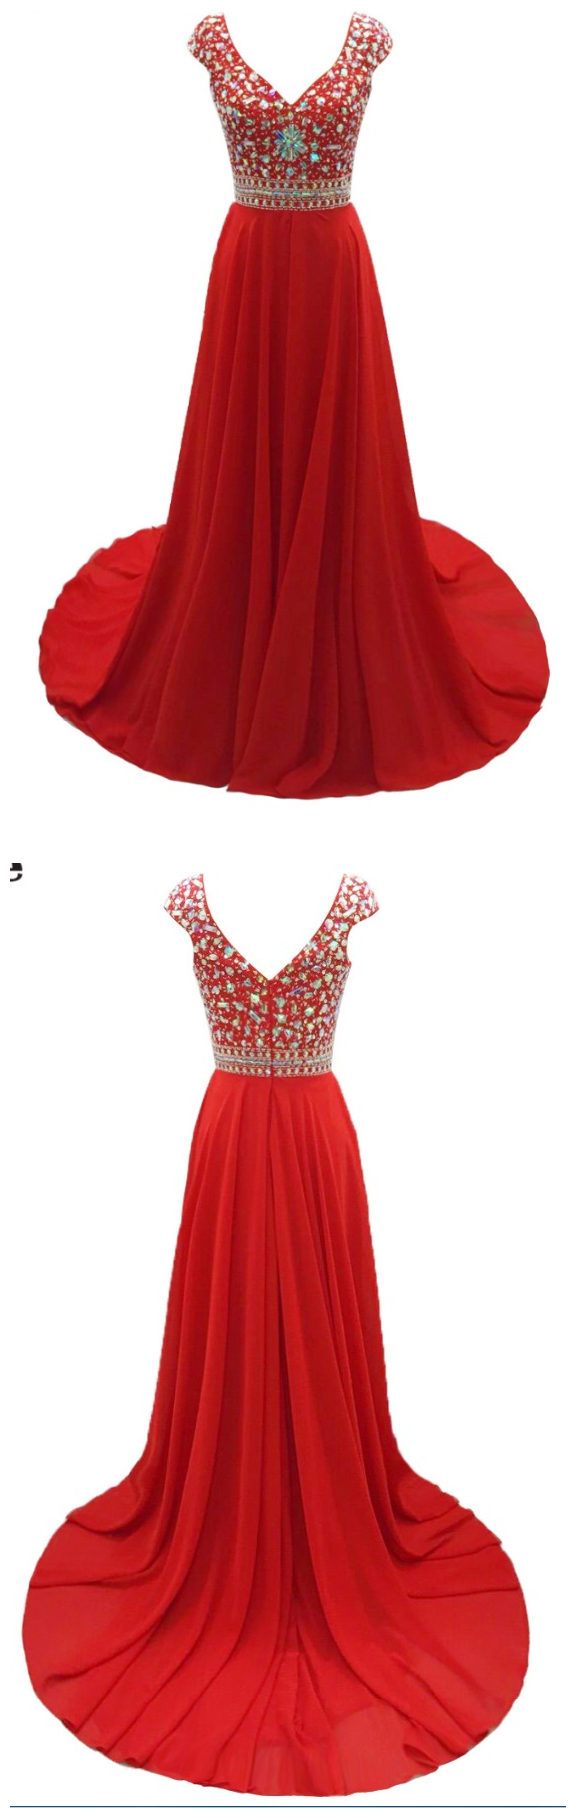 Red Chiffon Beaded Evening Dresses, Sweetheart Short Sleeves Charming Prom Party Gowns